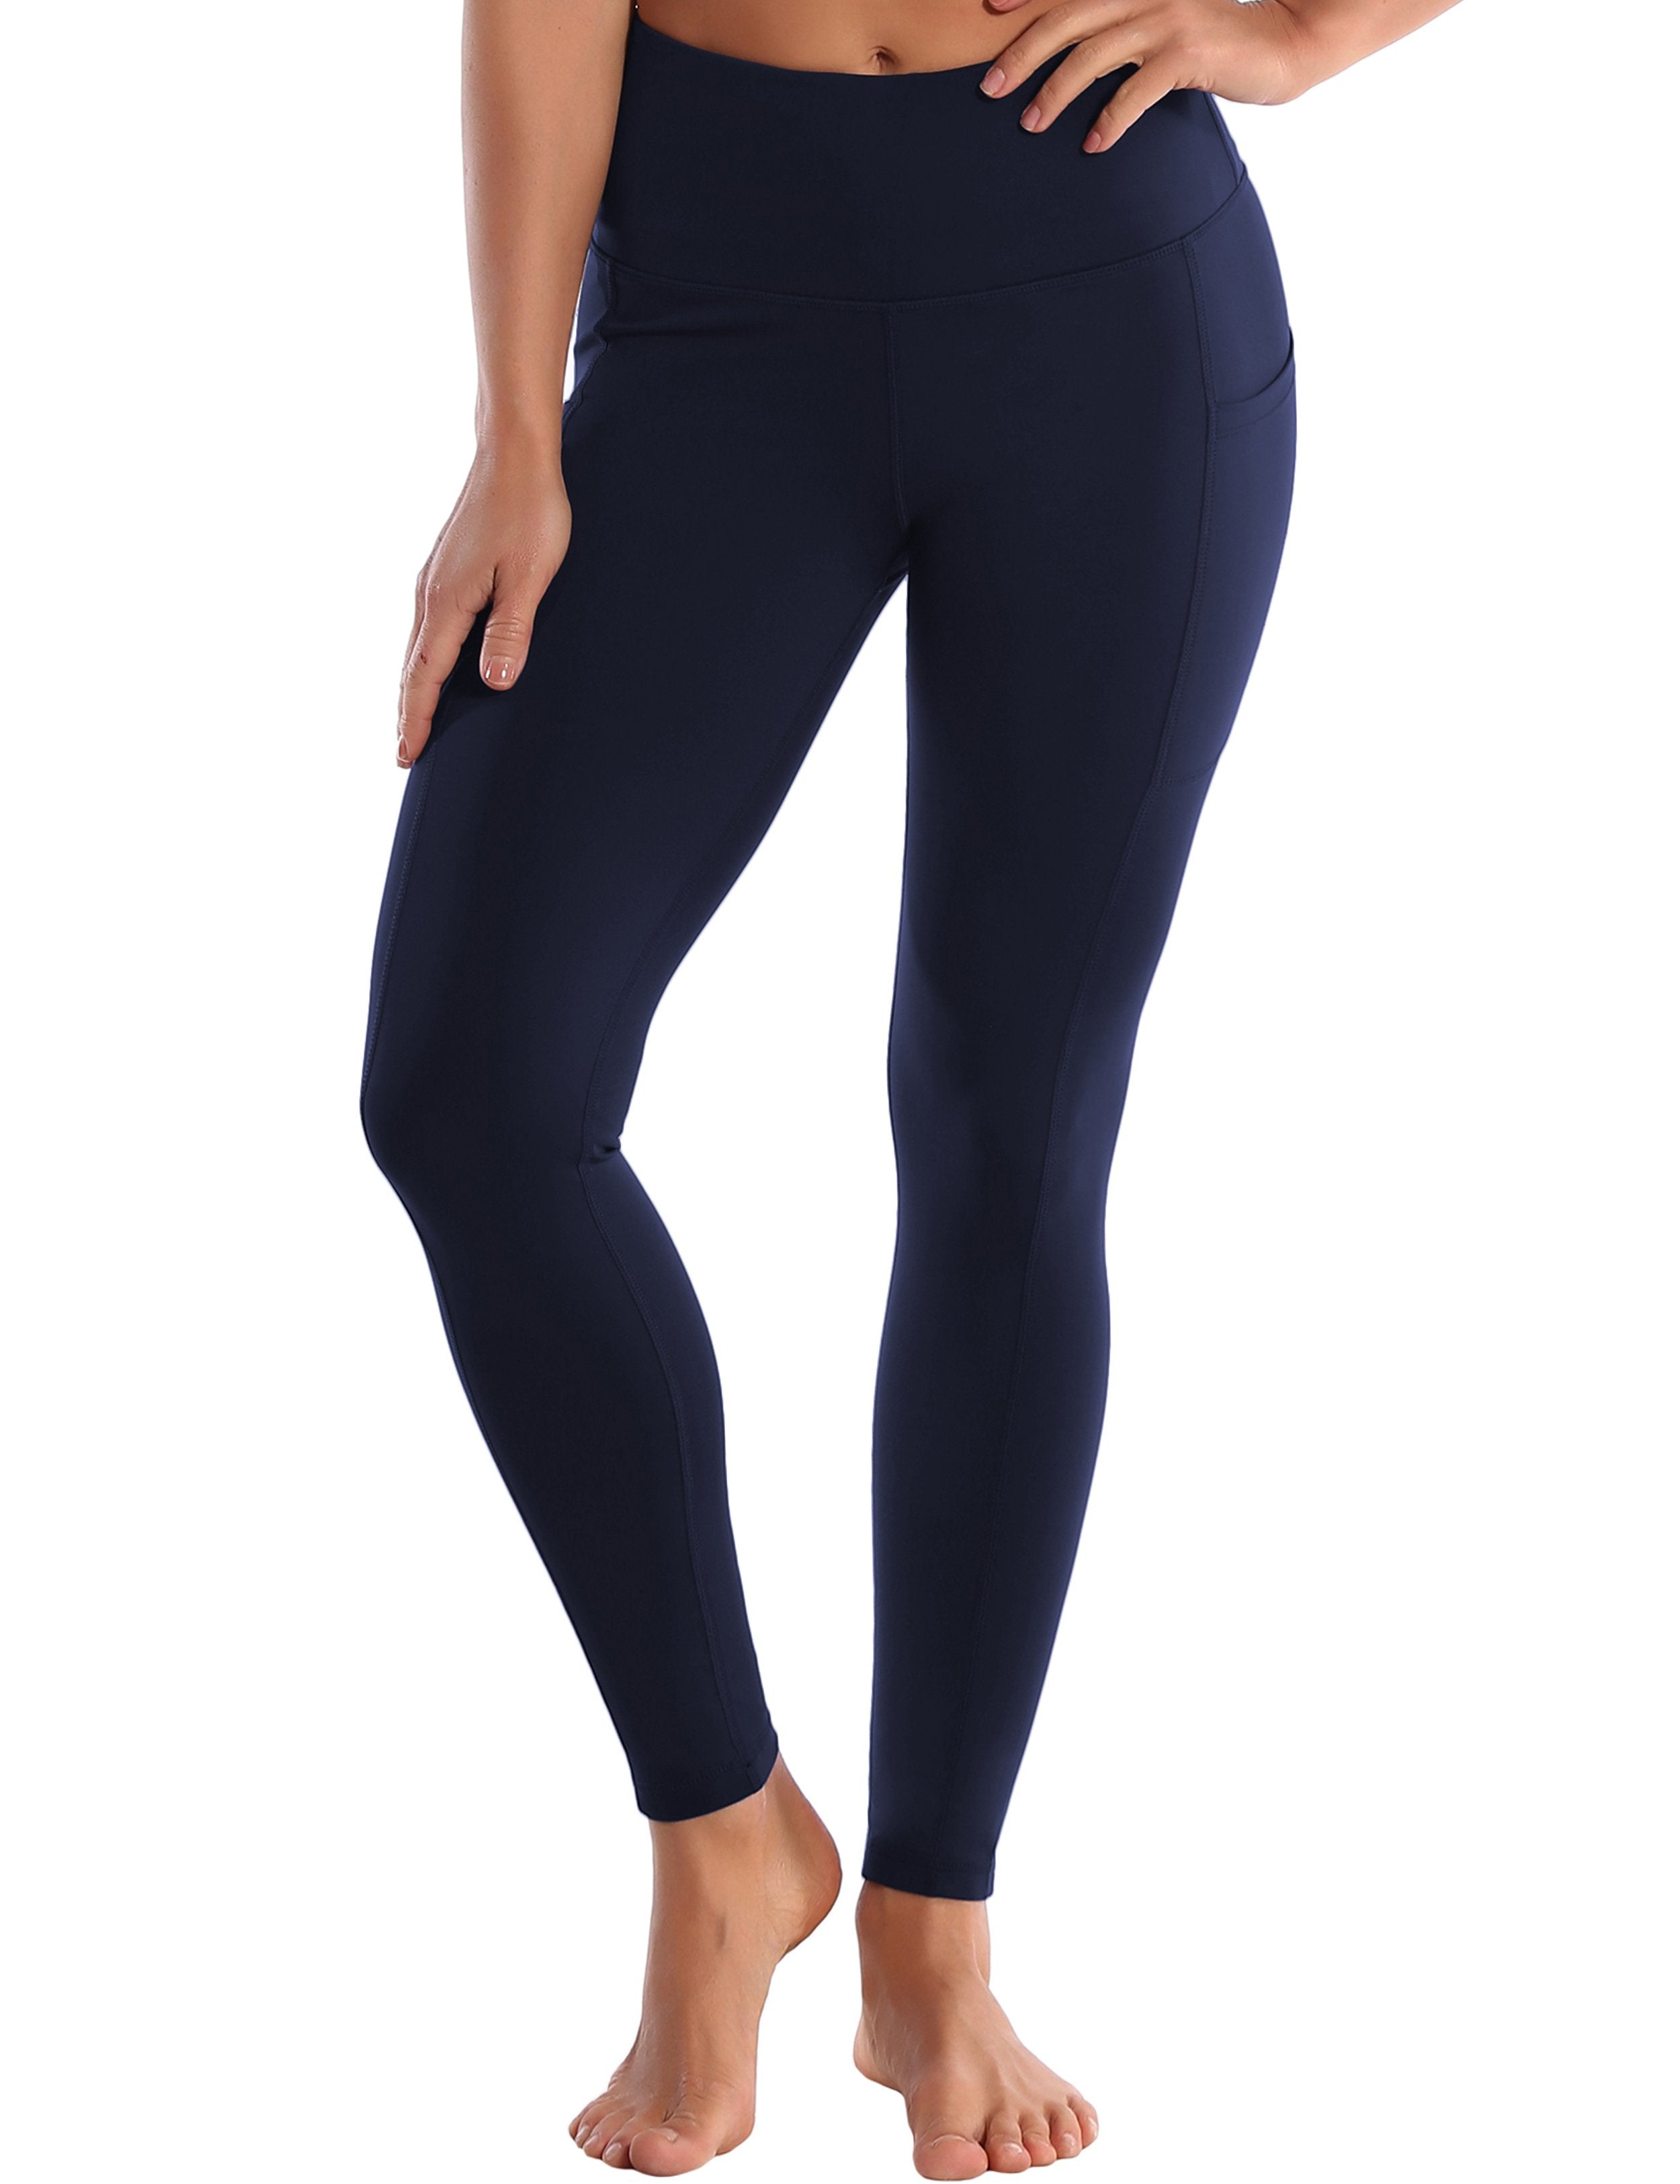 Hip Line Side Pockets Gym Pants darknavy Sexy Hip Line Side Pockets 75%Nylon/25%Spandex Fabric doesn't attract lint easily 4-way stretch No see-through Moisture-wicking Tummy control Inner pocket Two lengths